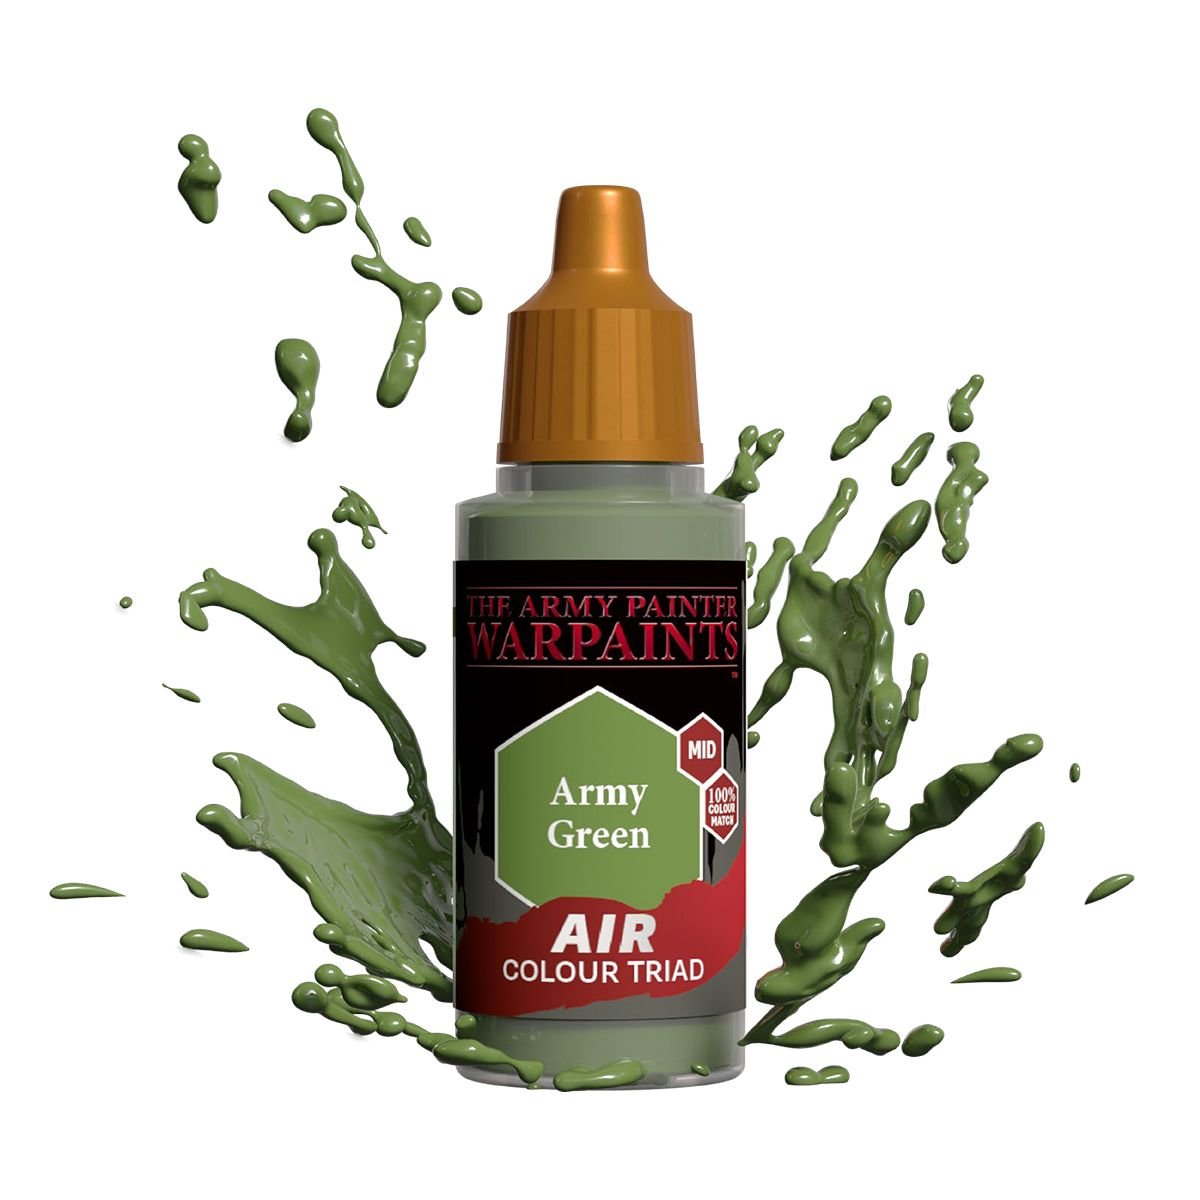 The Army Painter - Warpaints Air: Army Green (18ml/0.6oz)